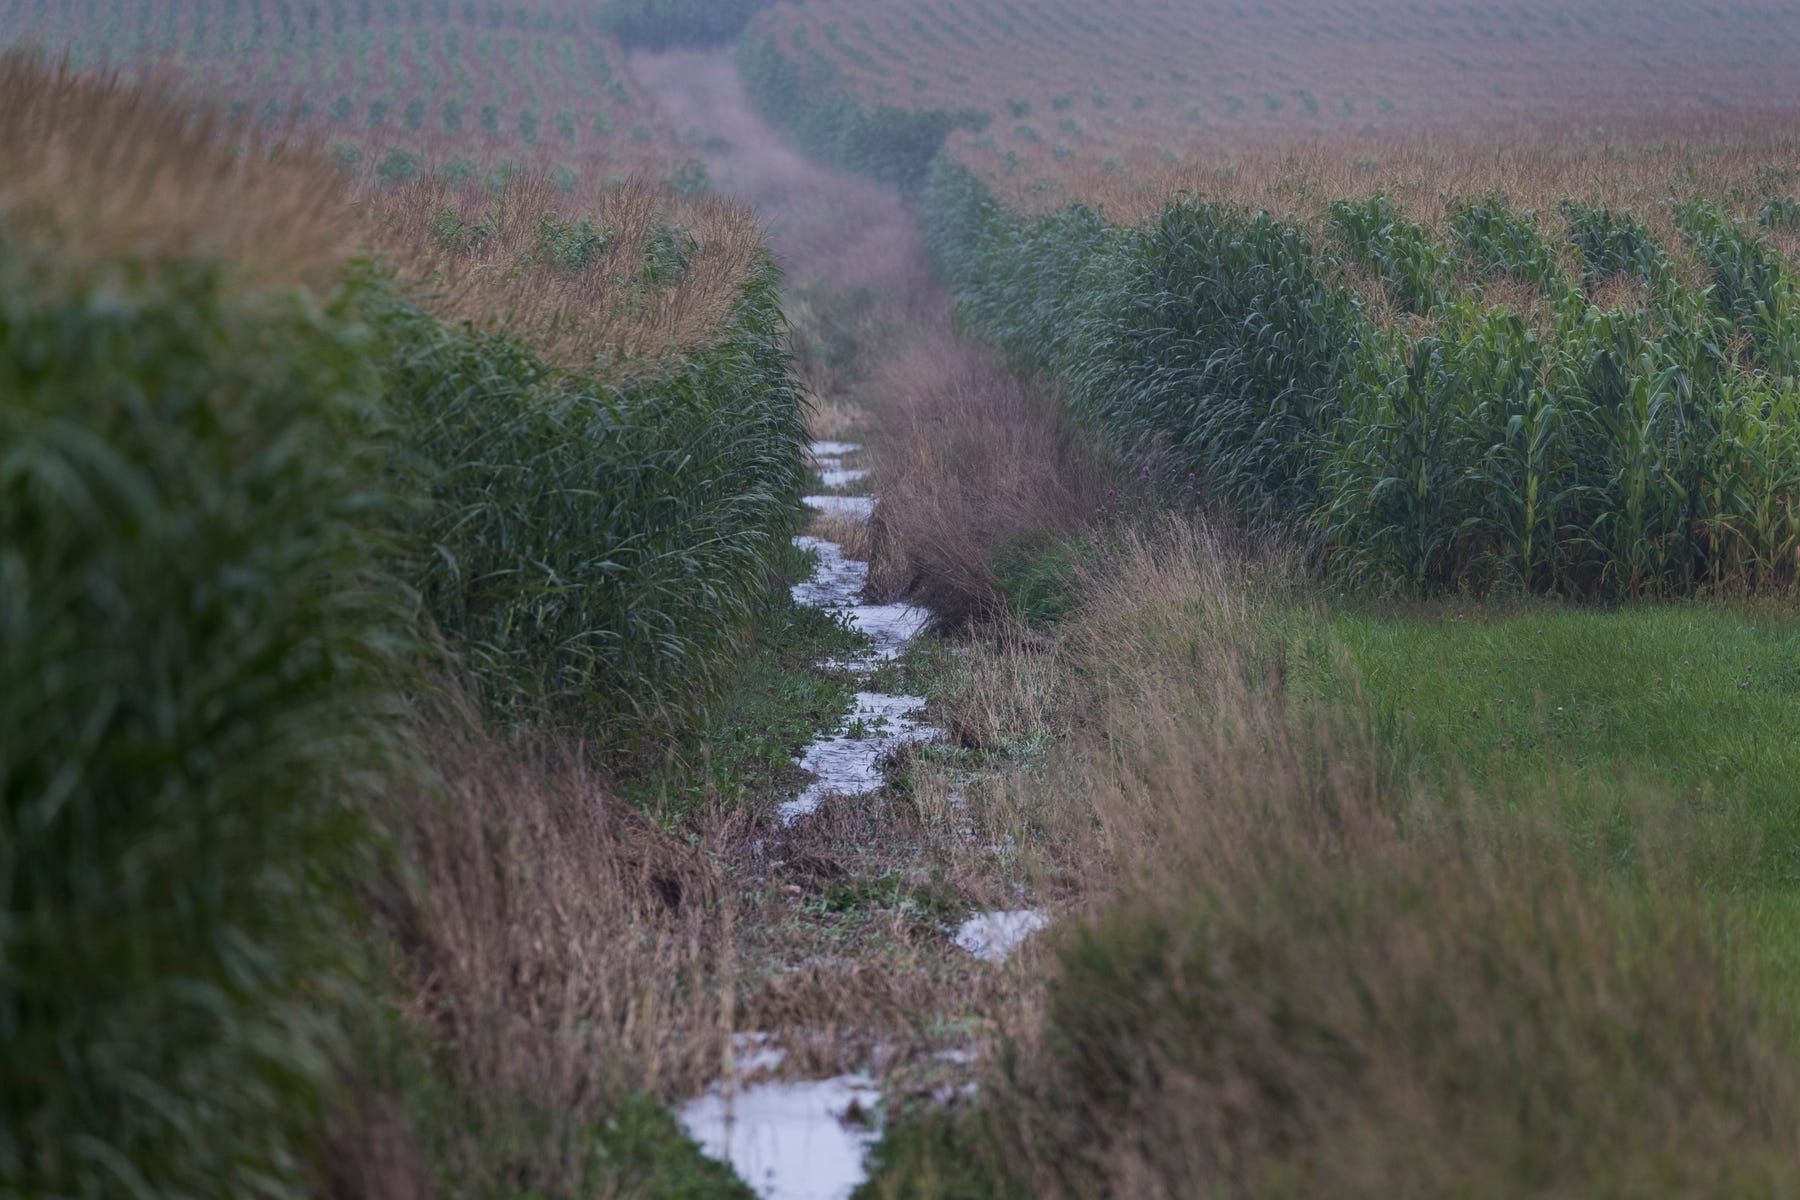 Water from a rain-soaked field flows between cornfields in Kewaunee County near Luxemburg. Image by Mark Hoffman. United States, 2019.